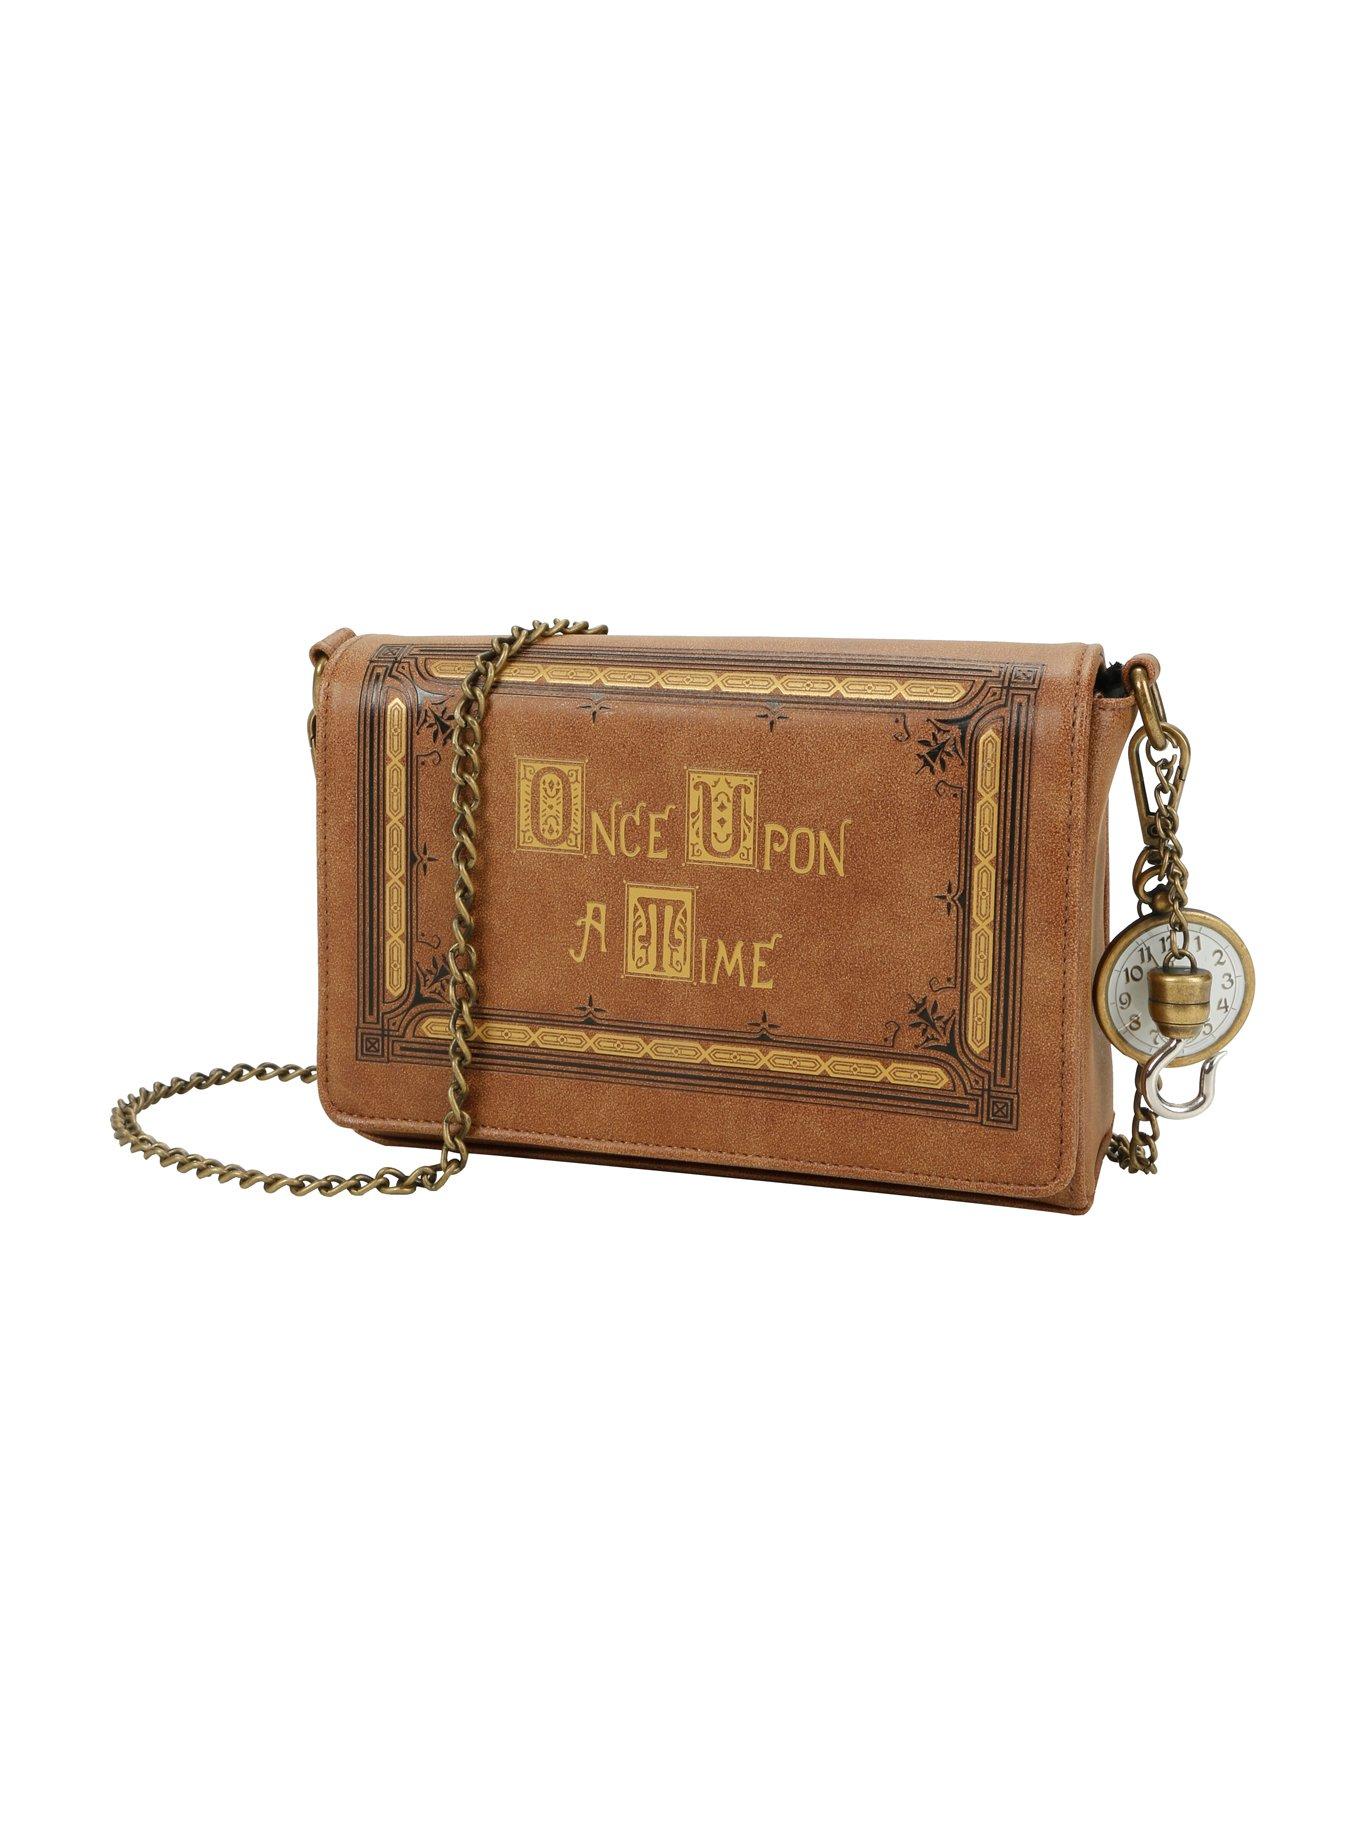 Once Upon A Time Book Cover Crossbody Bag, , hi-res